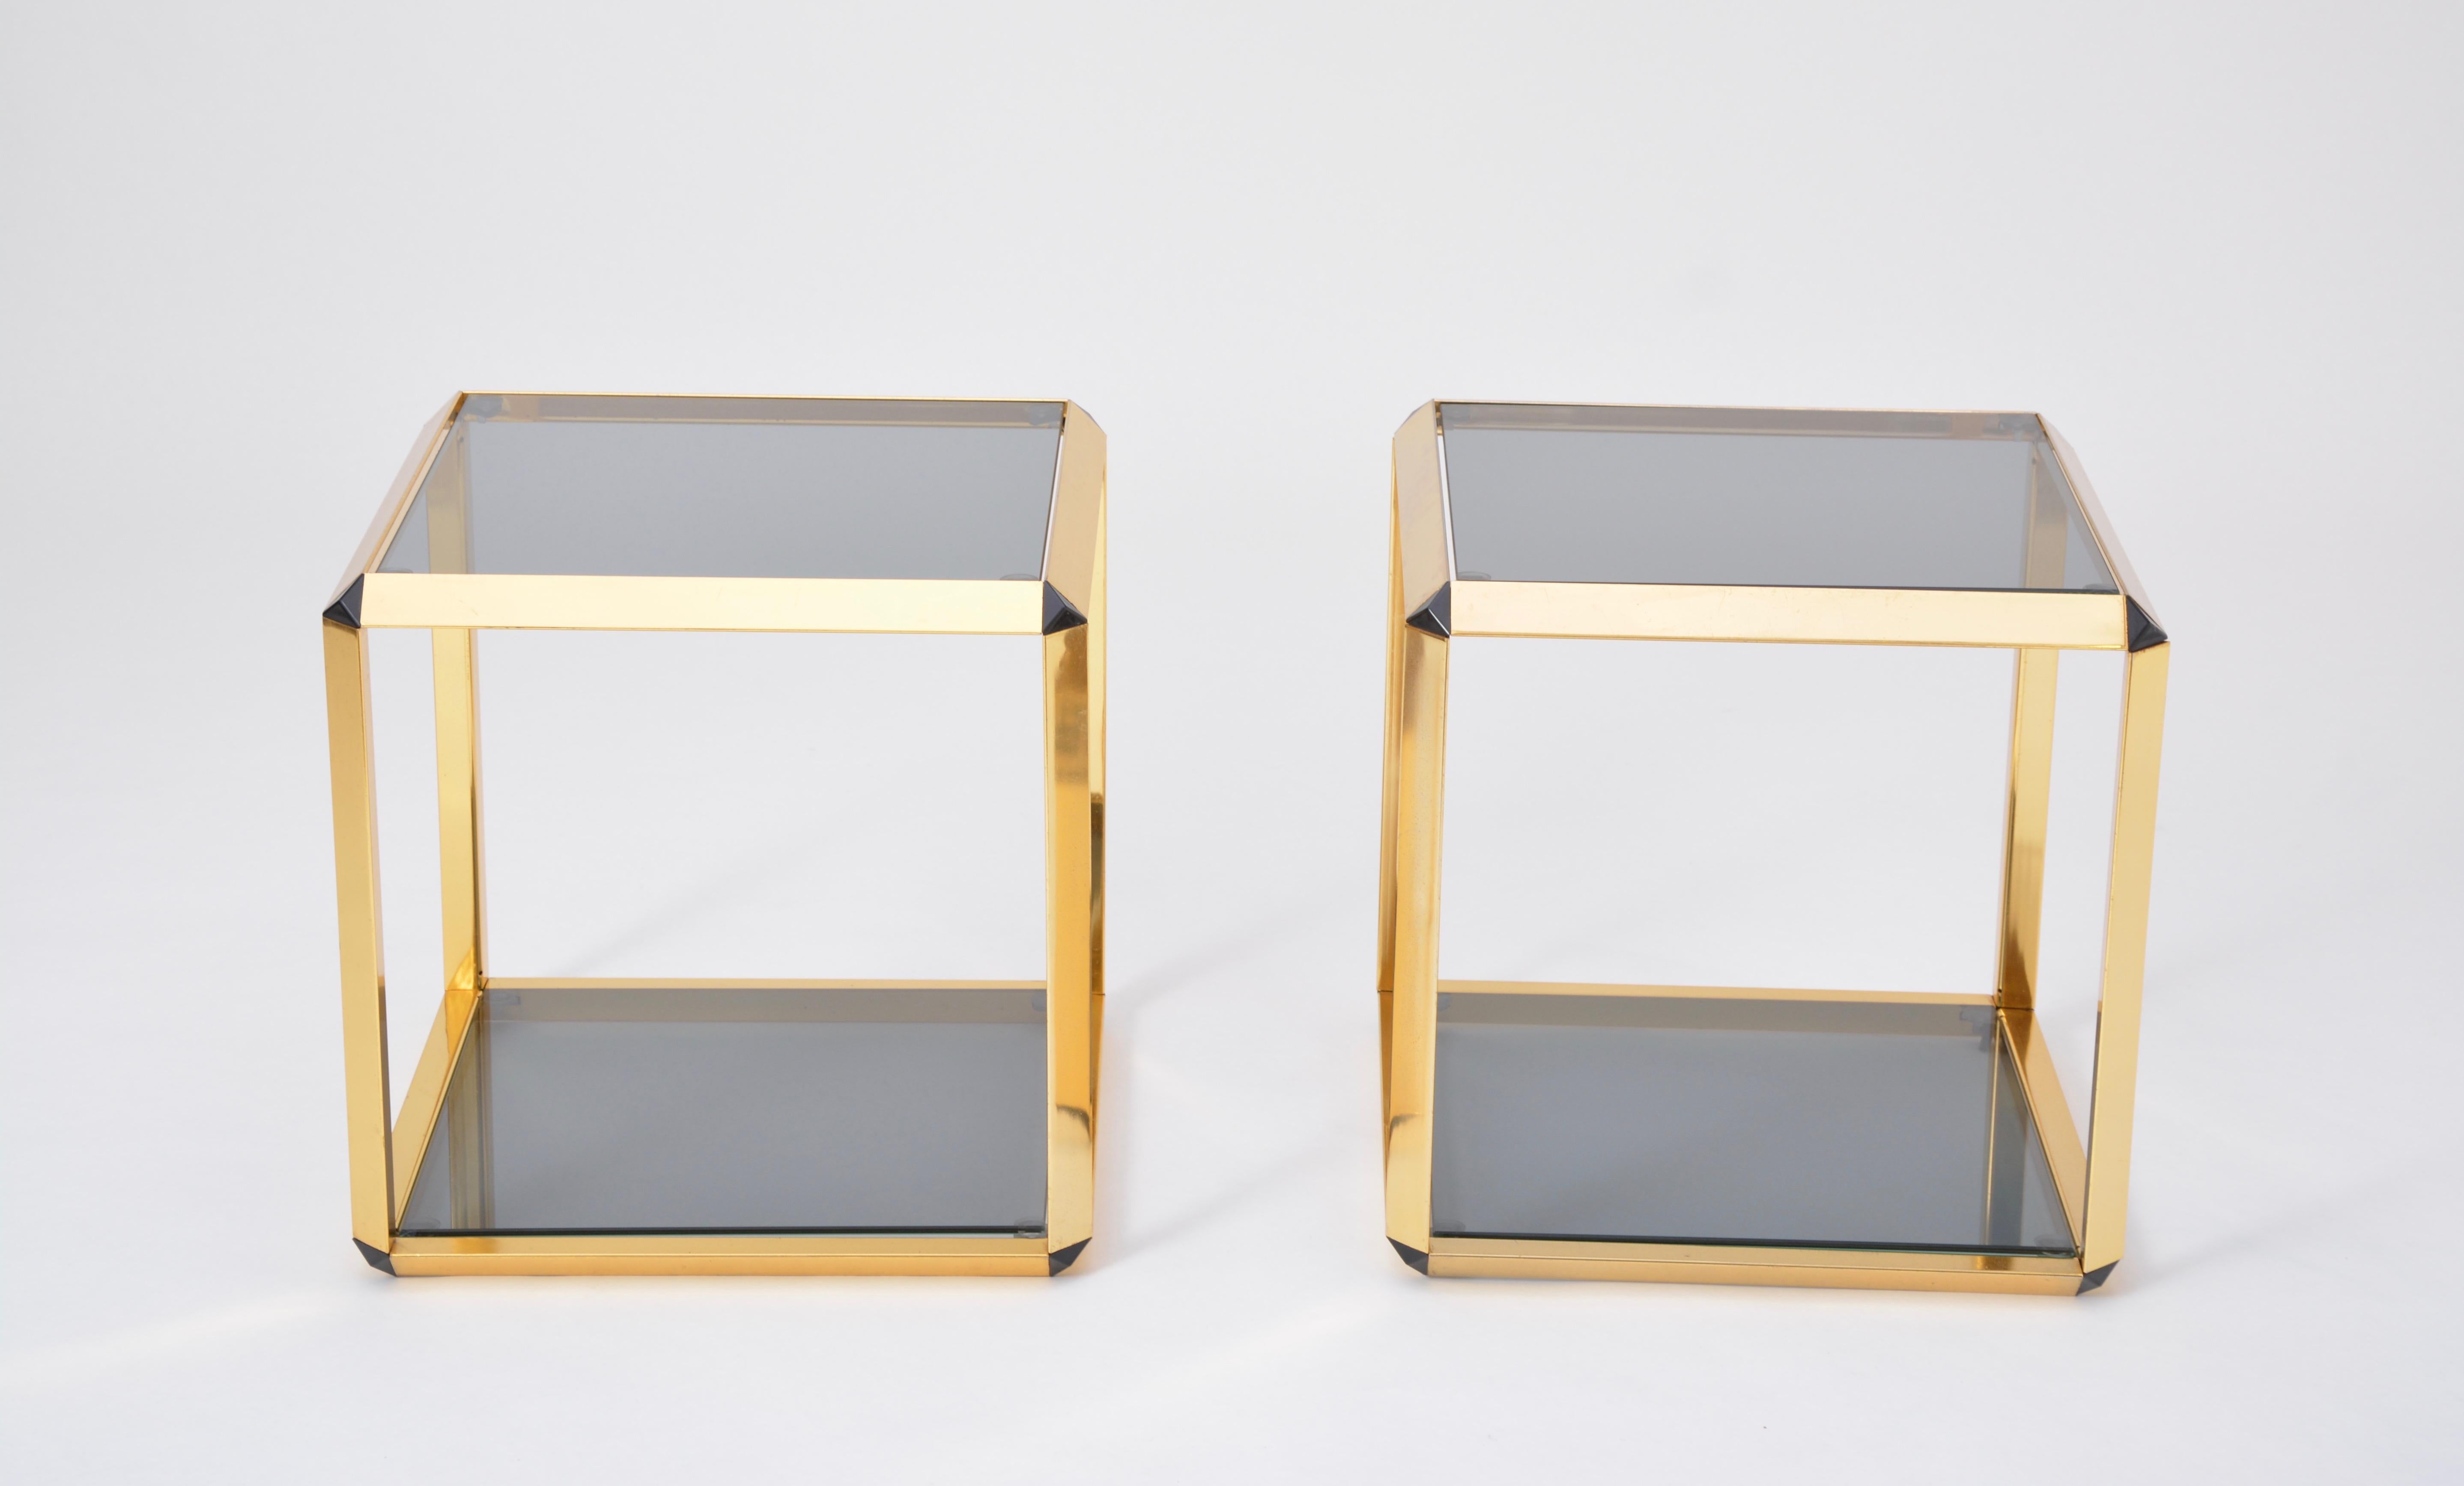 Pair of Gold Colored Italian side tables by Alberto Rosselli for Saporiti

Beautiful and rare pair of low tables in gold-colored steel frames Model P800 designed by Alberto Rosselli for Saporiti Italia in 1972.
Gold color version with smoked glass